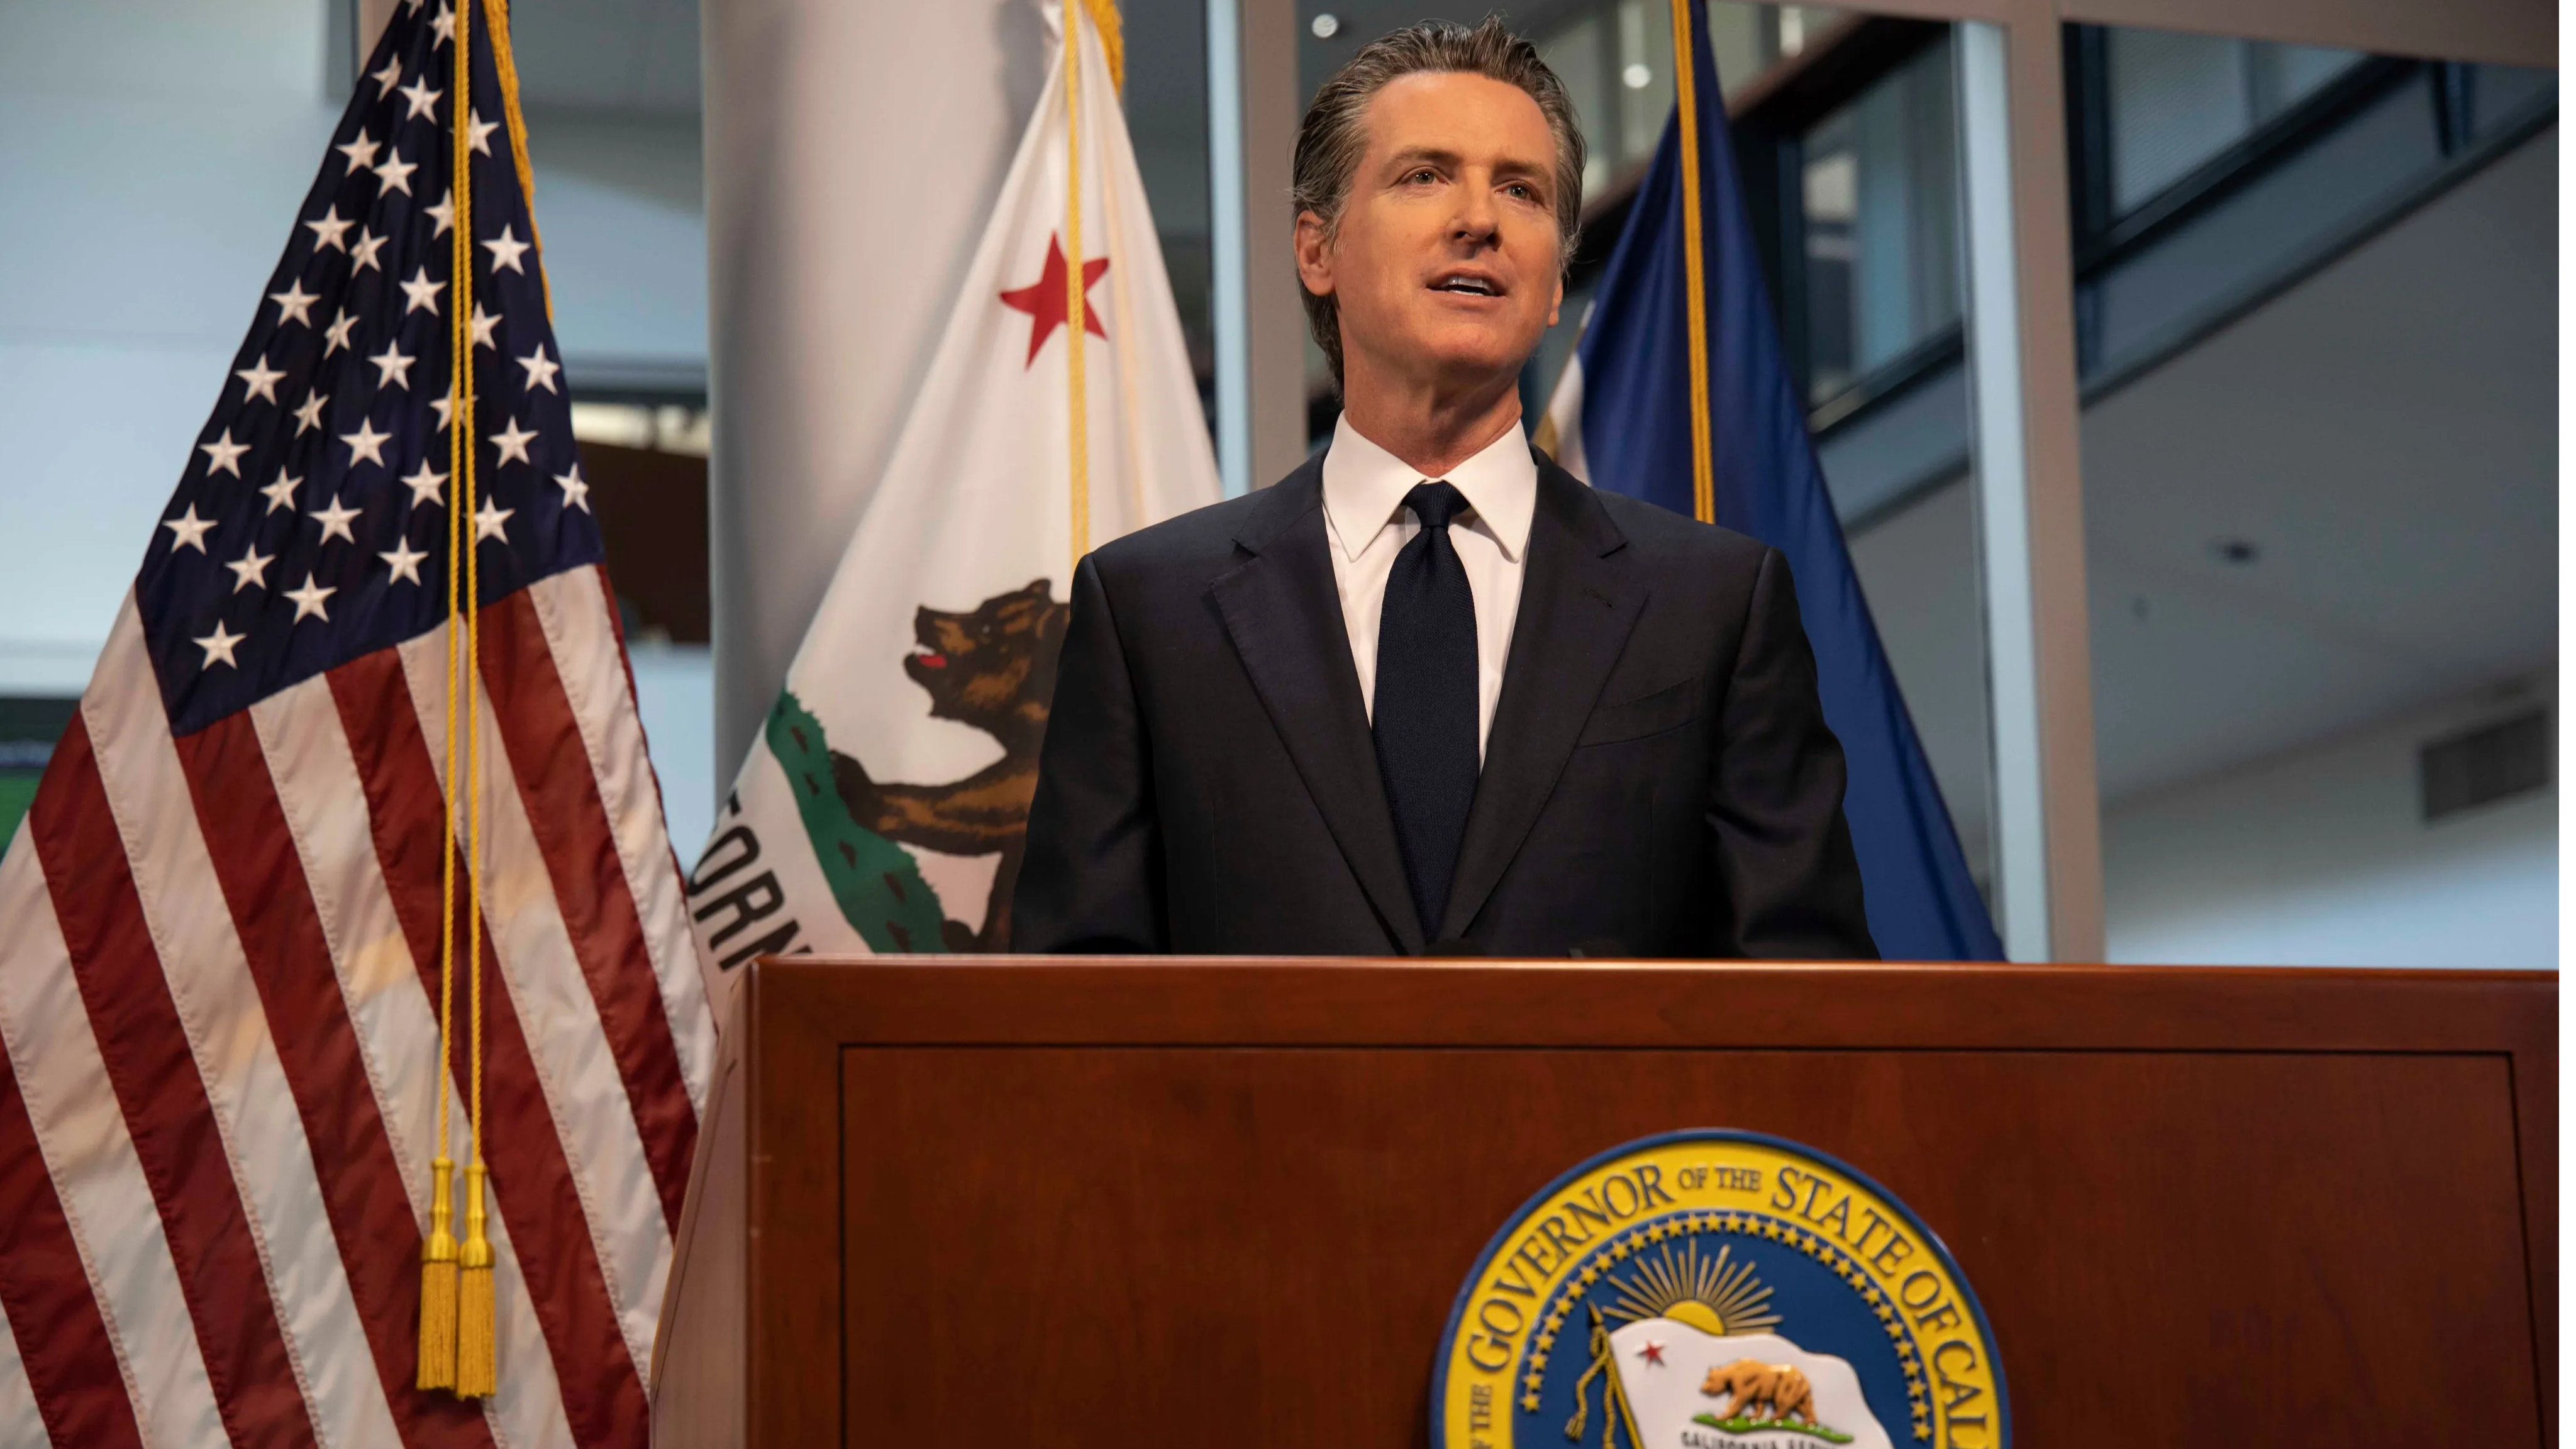 California Recall: The areas that may decide Gavin Newsom’s survival